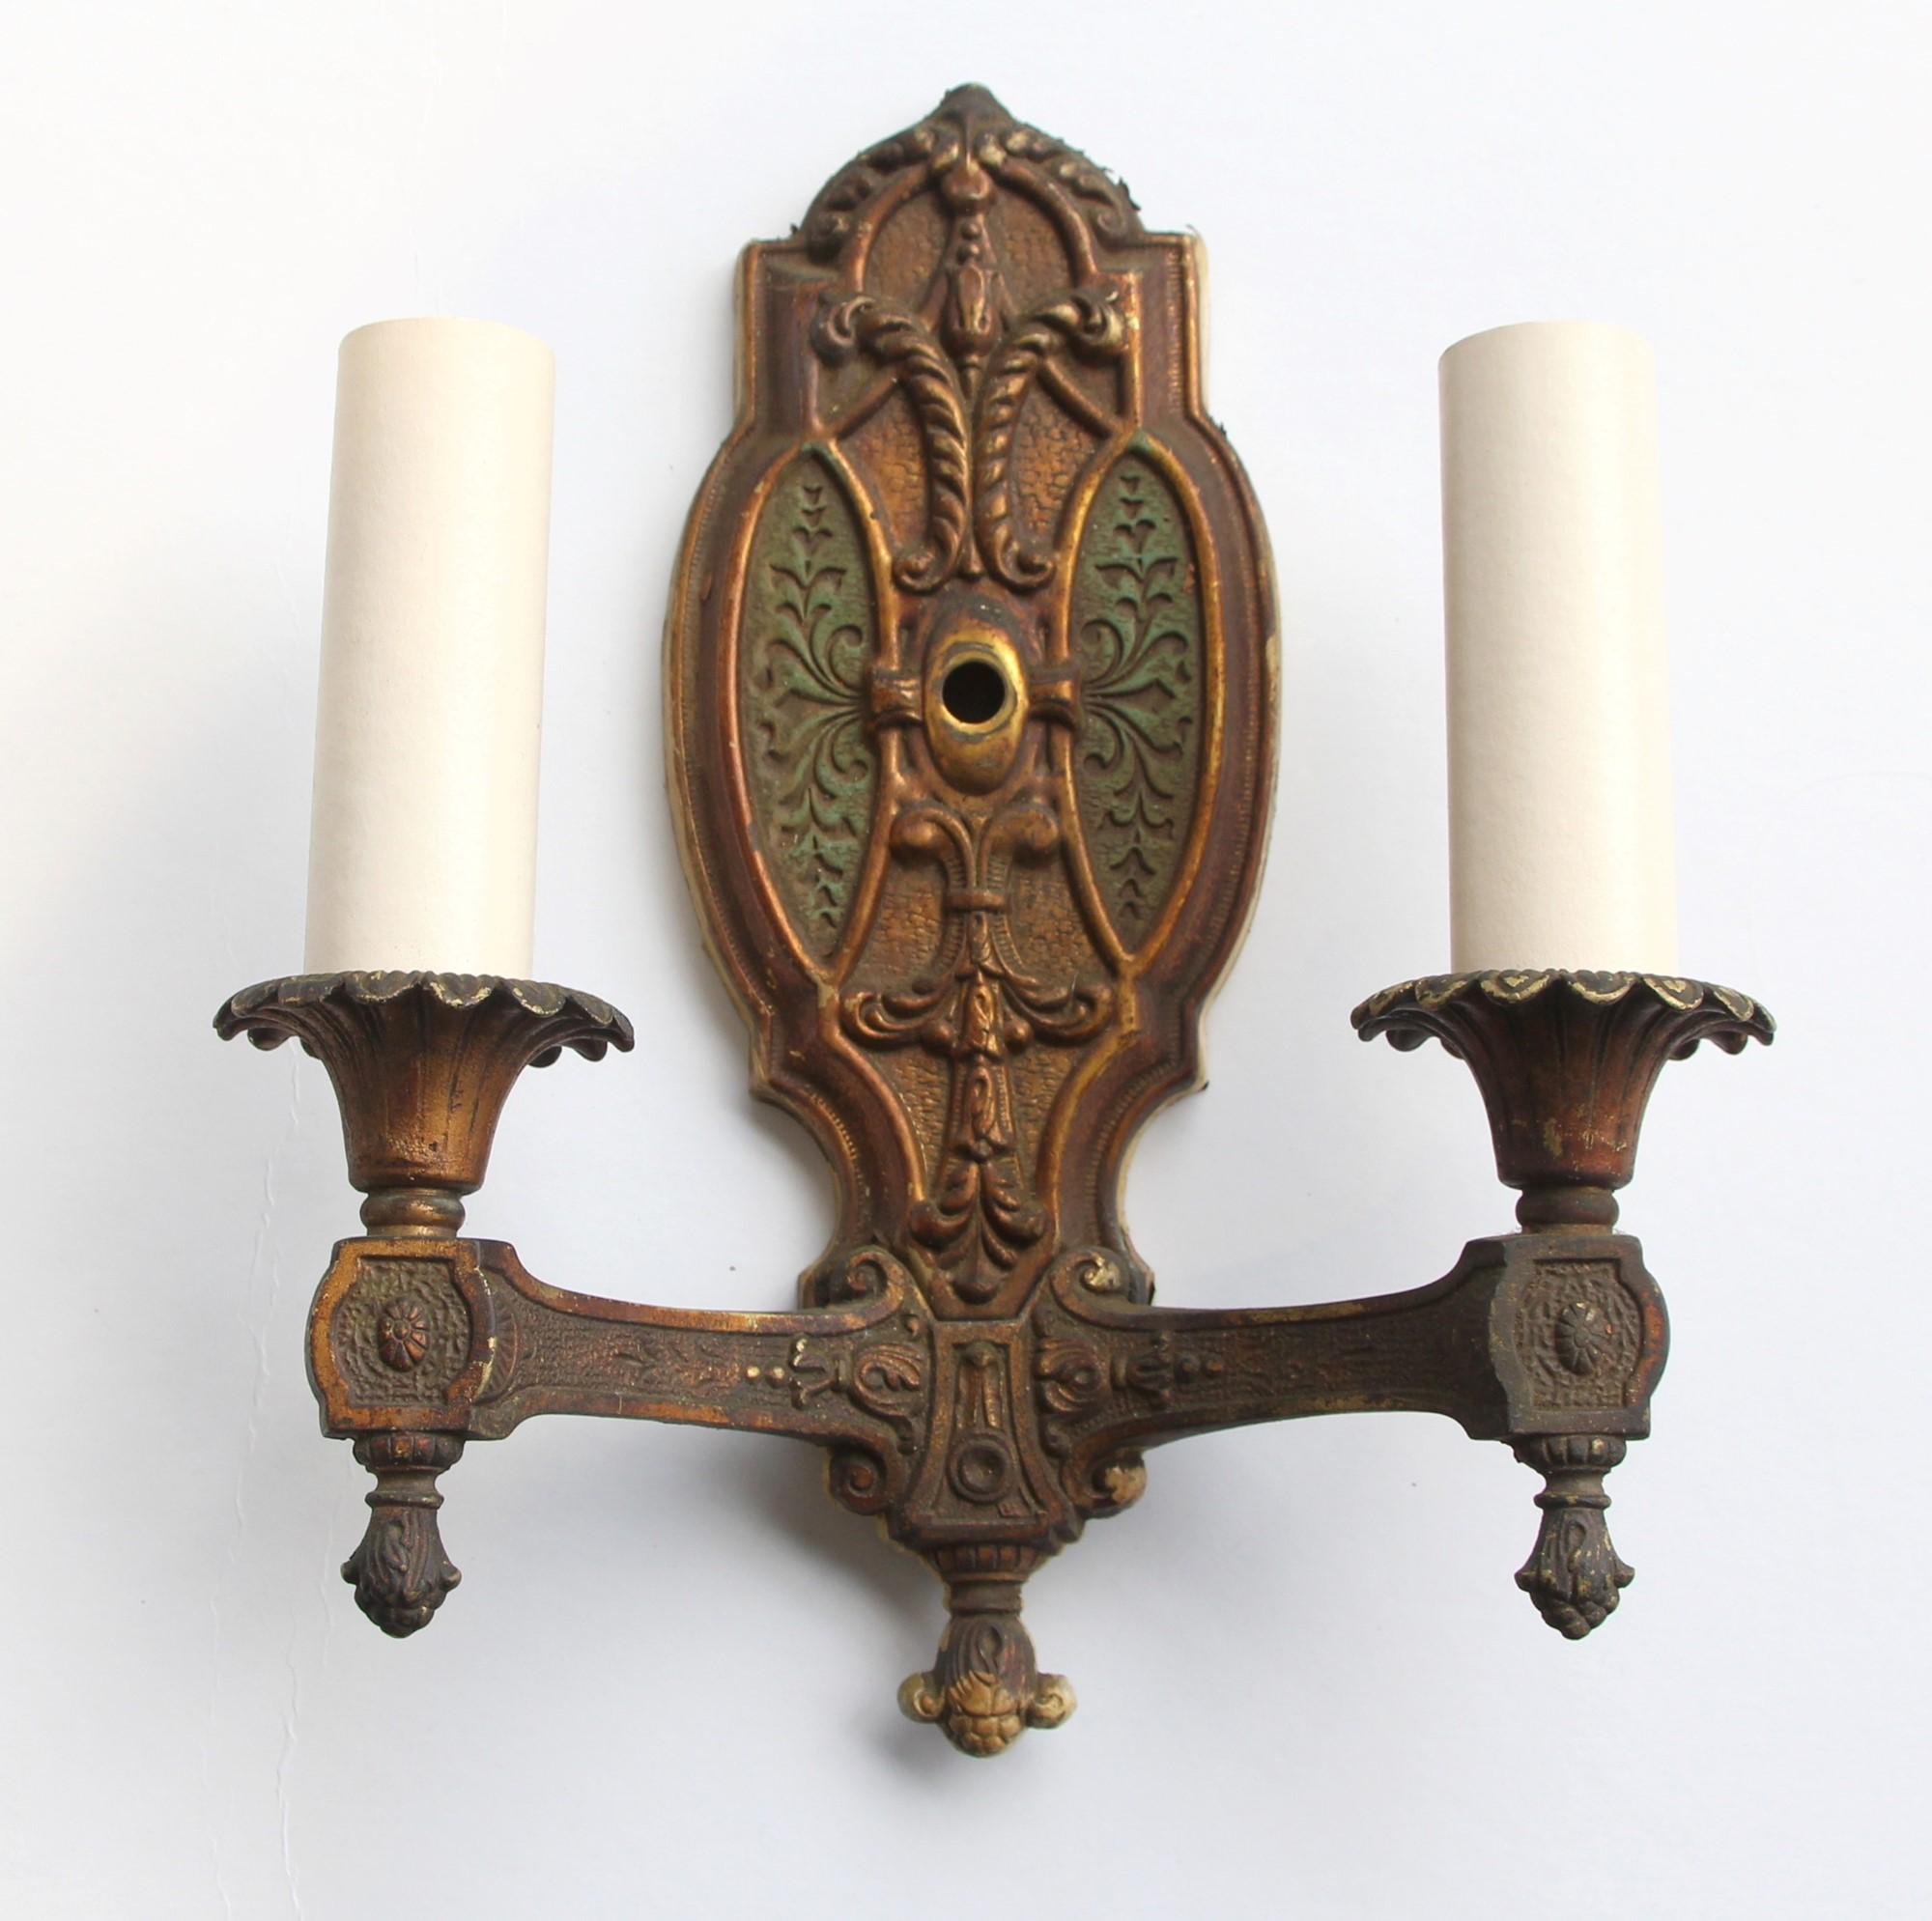 Pair of Gothic double arm sconces with original green and gold bronze finish. From the 1940s. These will be cleaned and rewired before shipping. Priced as a pair. This can be seen at our 400 Gilligan St location in Scranton, PA.